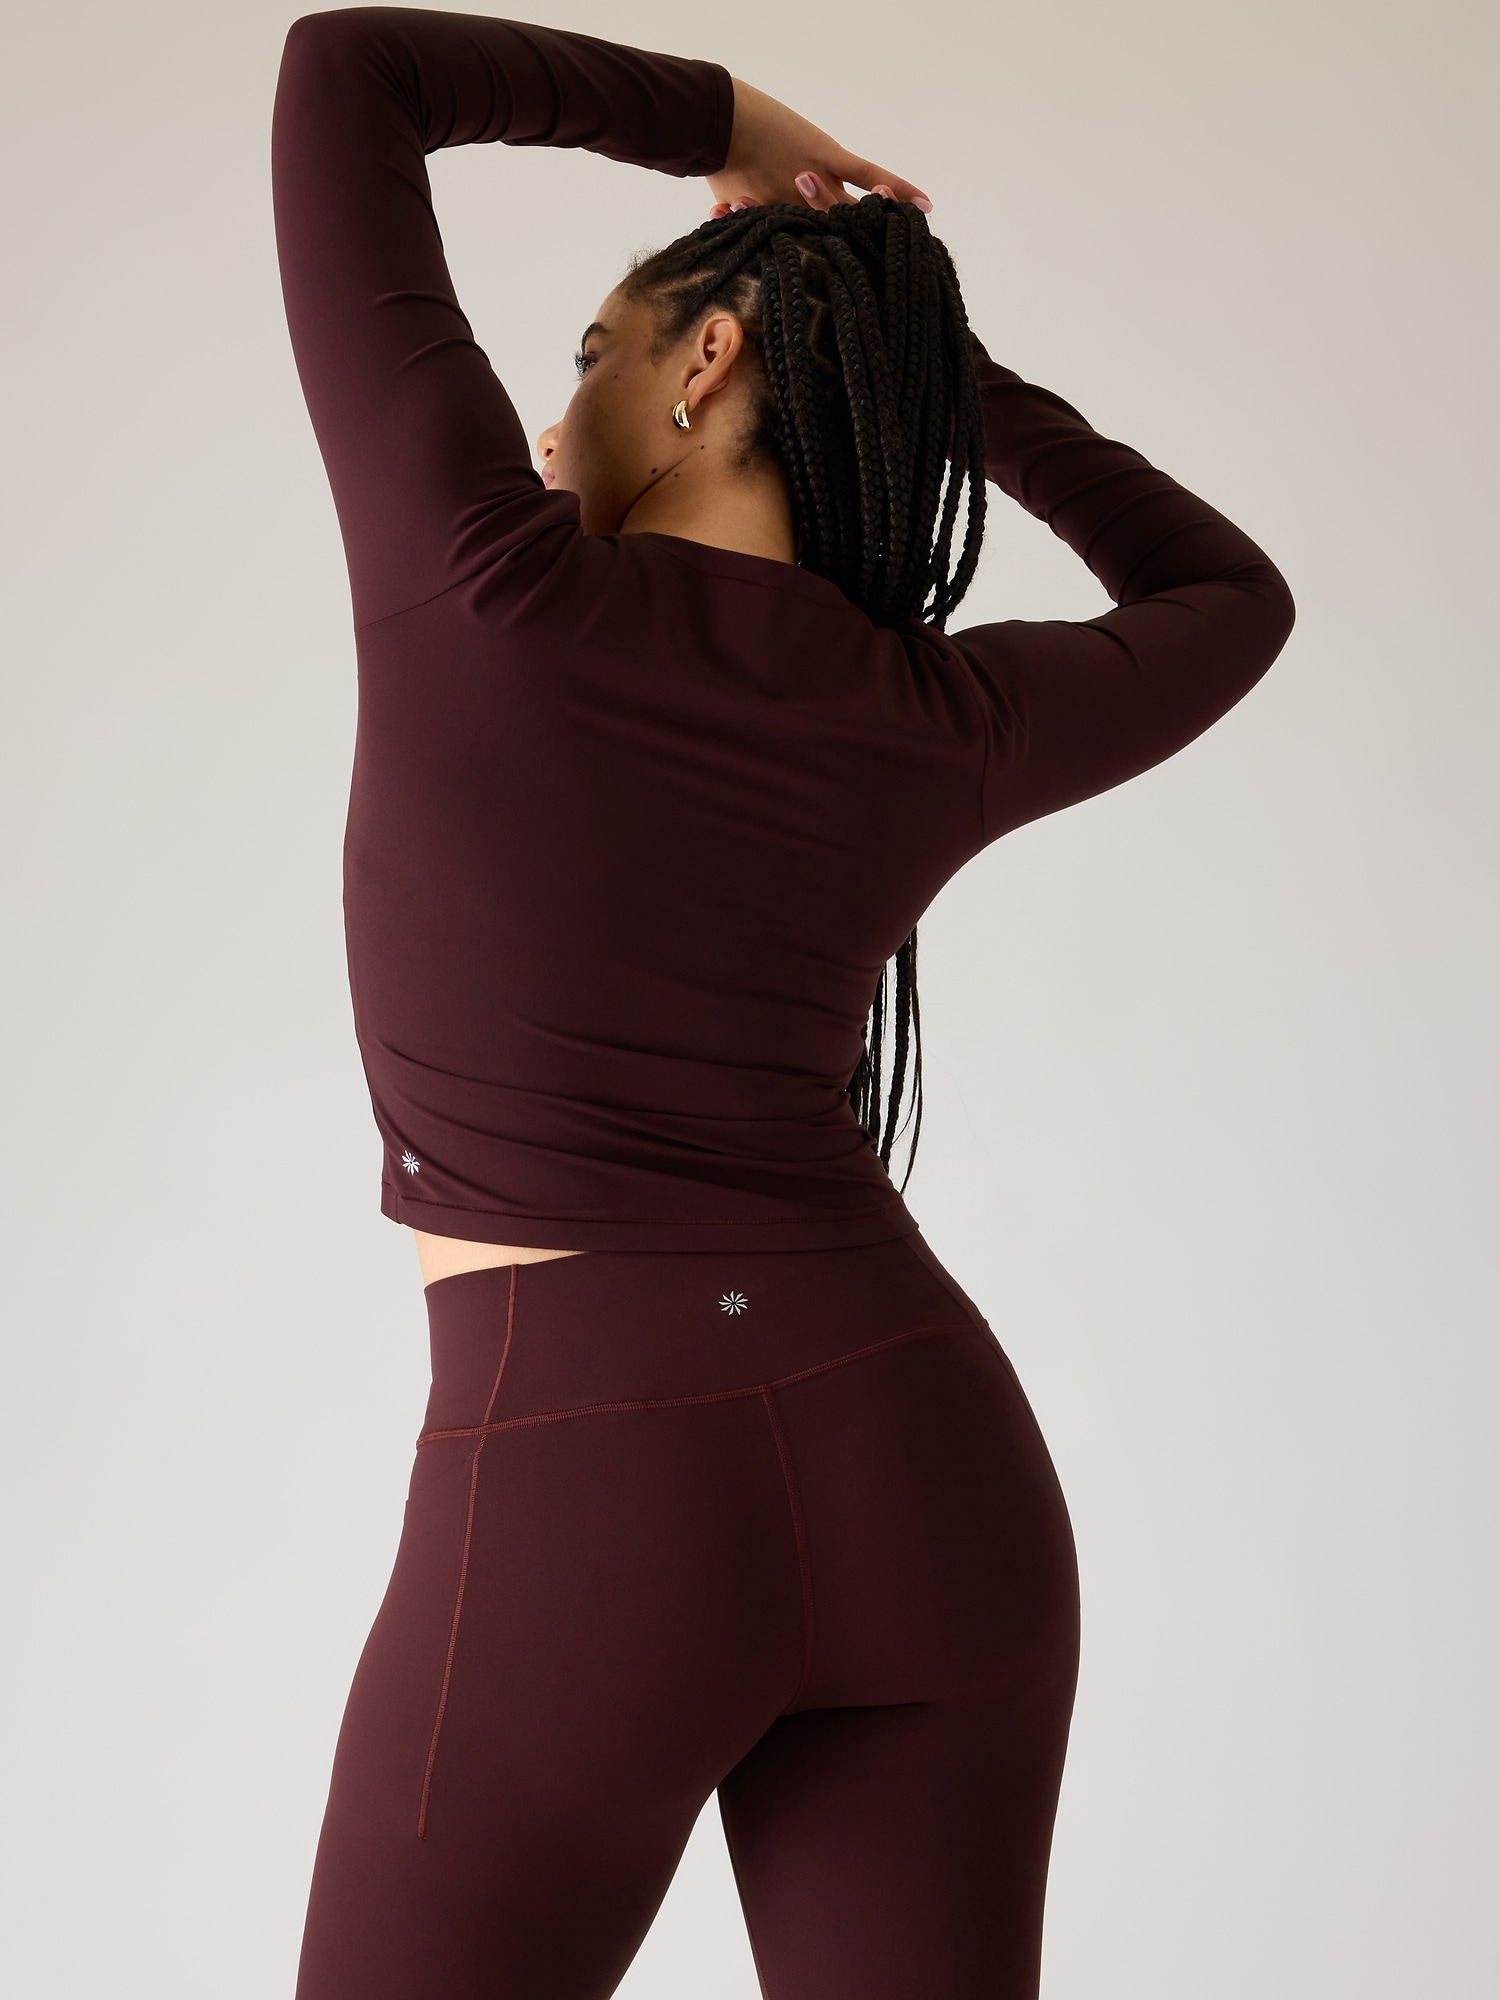 Solid Yoga Wrap Top with Long Sleeves